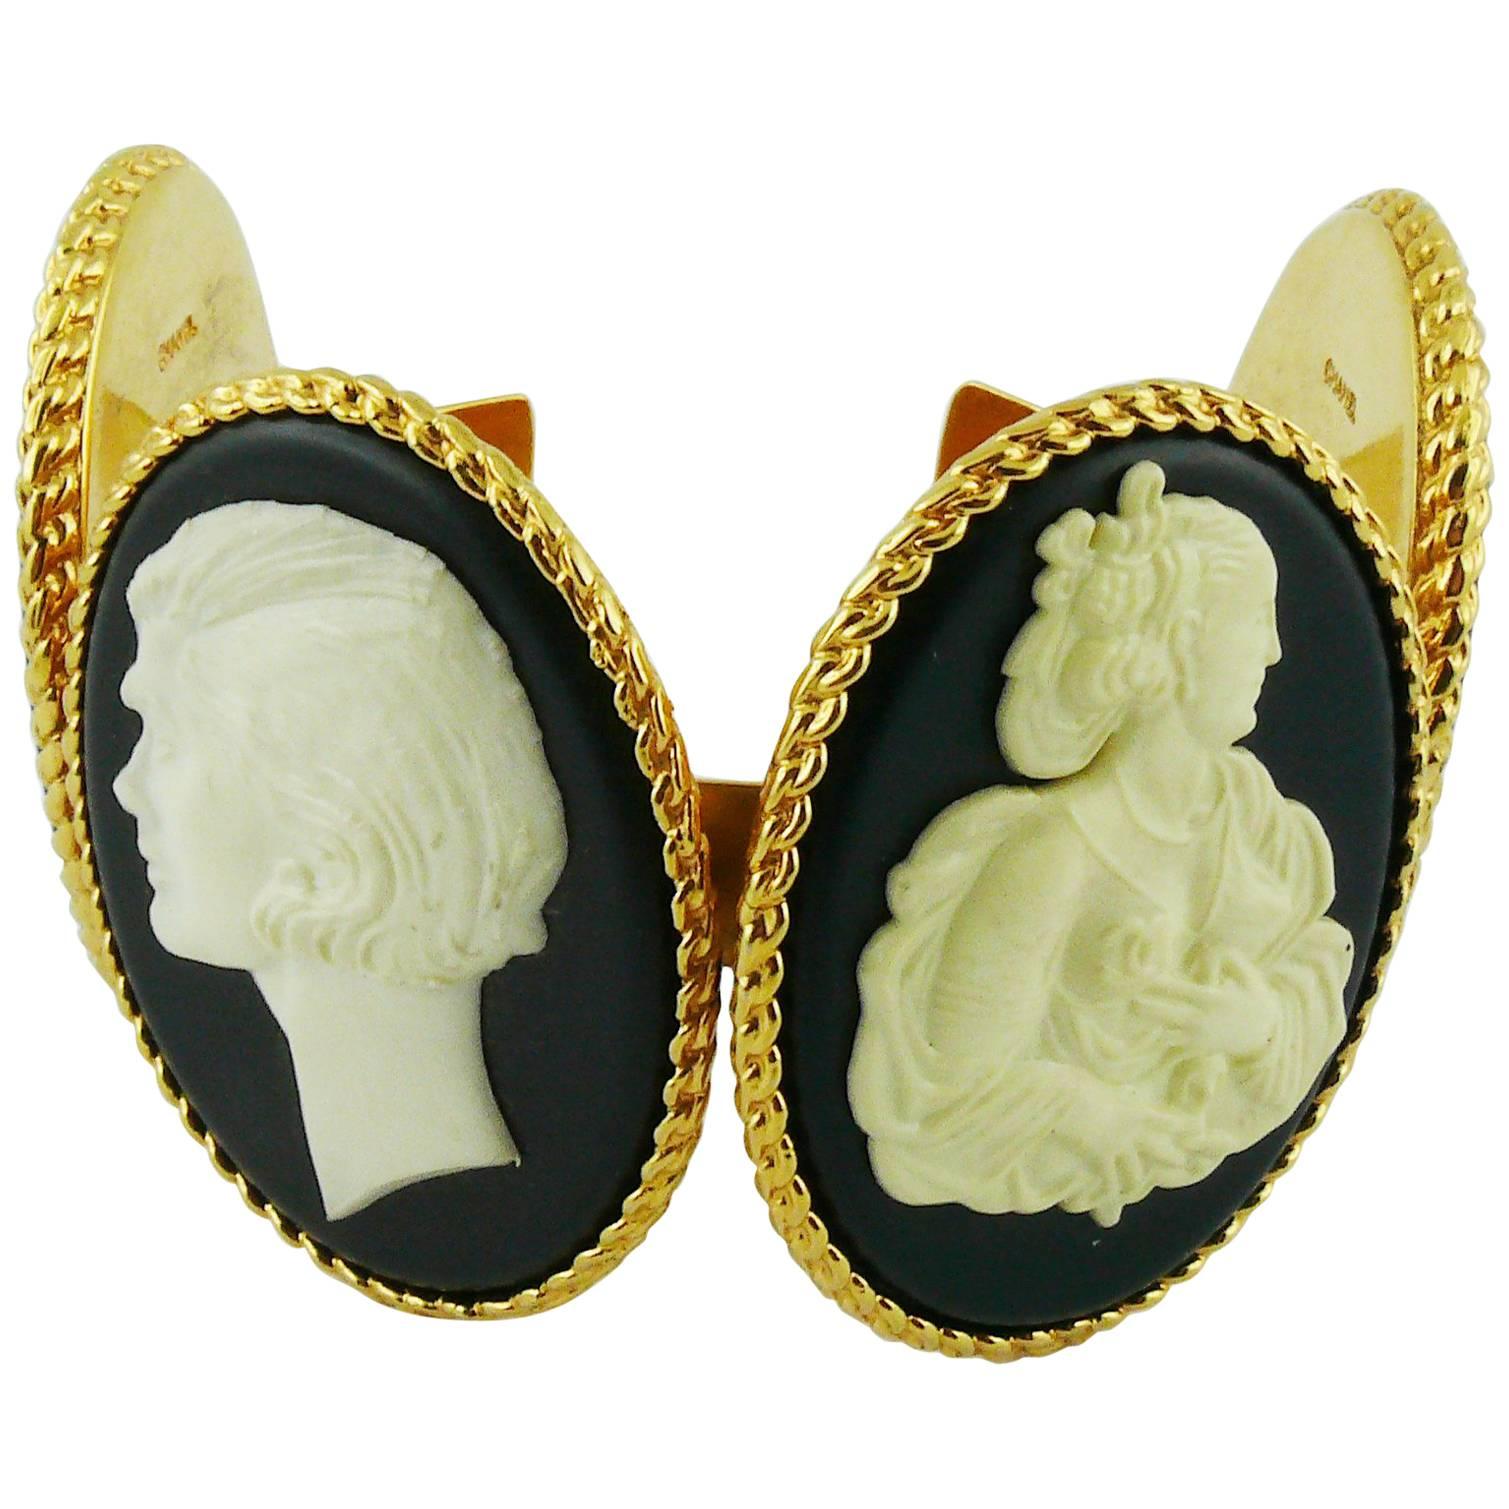 Chanel Vintage Uber Rare Cameo Cuff Bracelet Collector